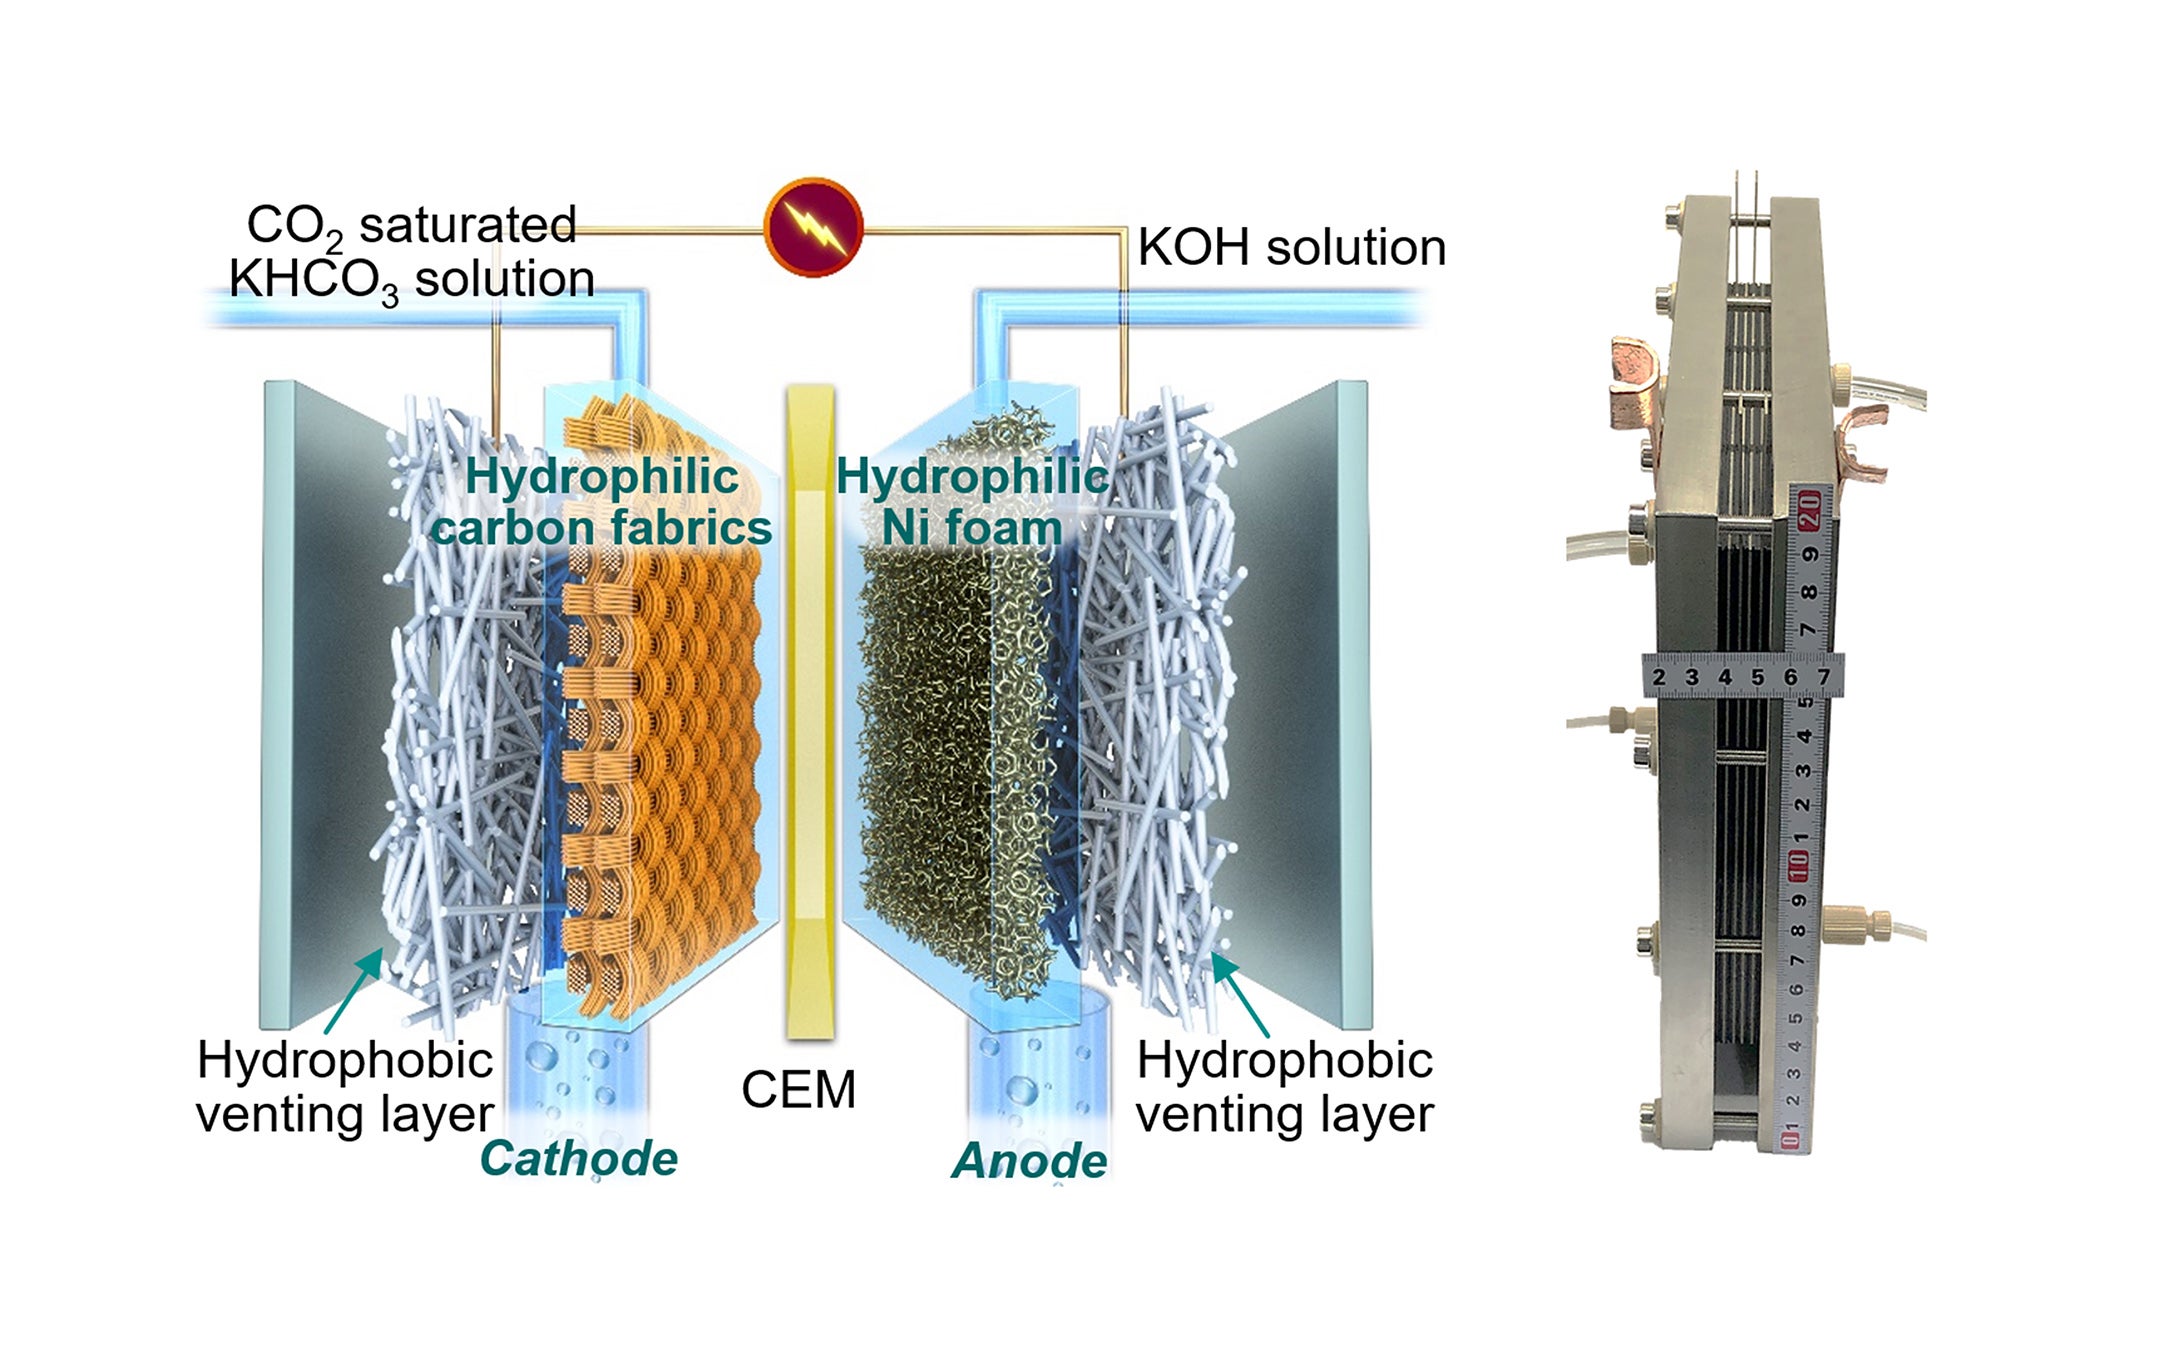 Left: a schematic showing the key components of the reactor and working mechanism.

Right: a picture of the CO2 stack, which is a demonstration of the commercial reactors.